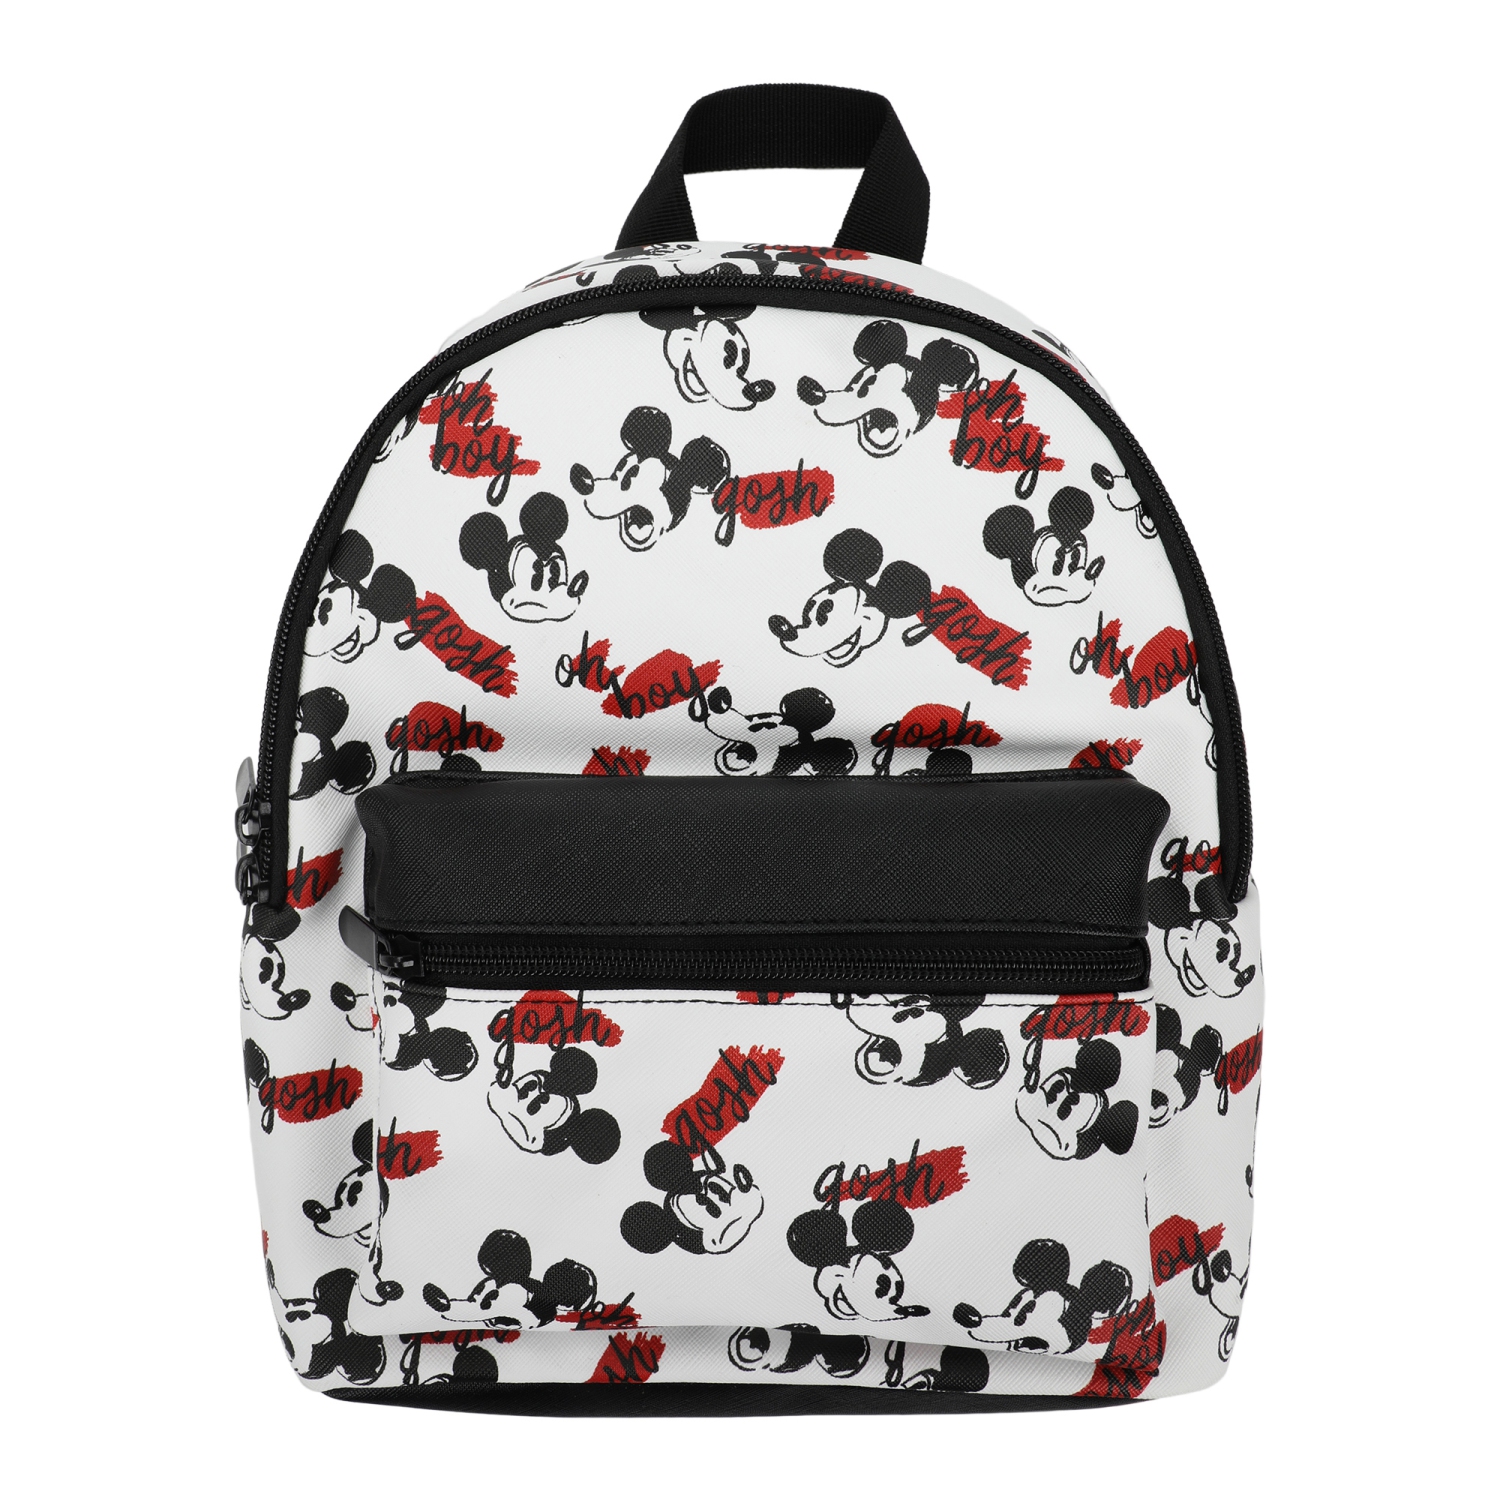 Mickey Mouse Oh Boy Gosh Illustrations Mini Backpack